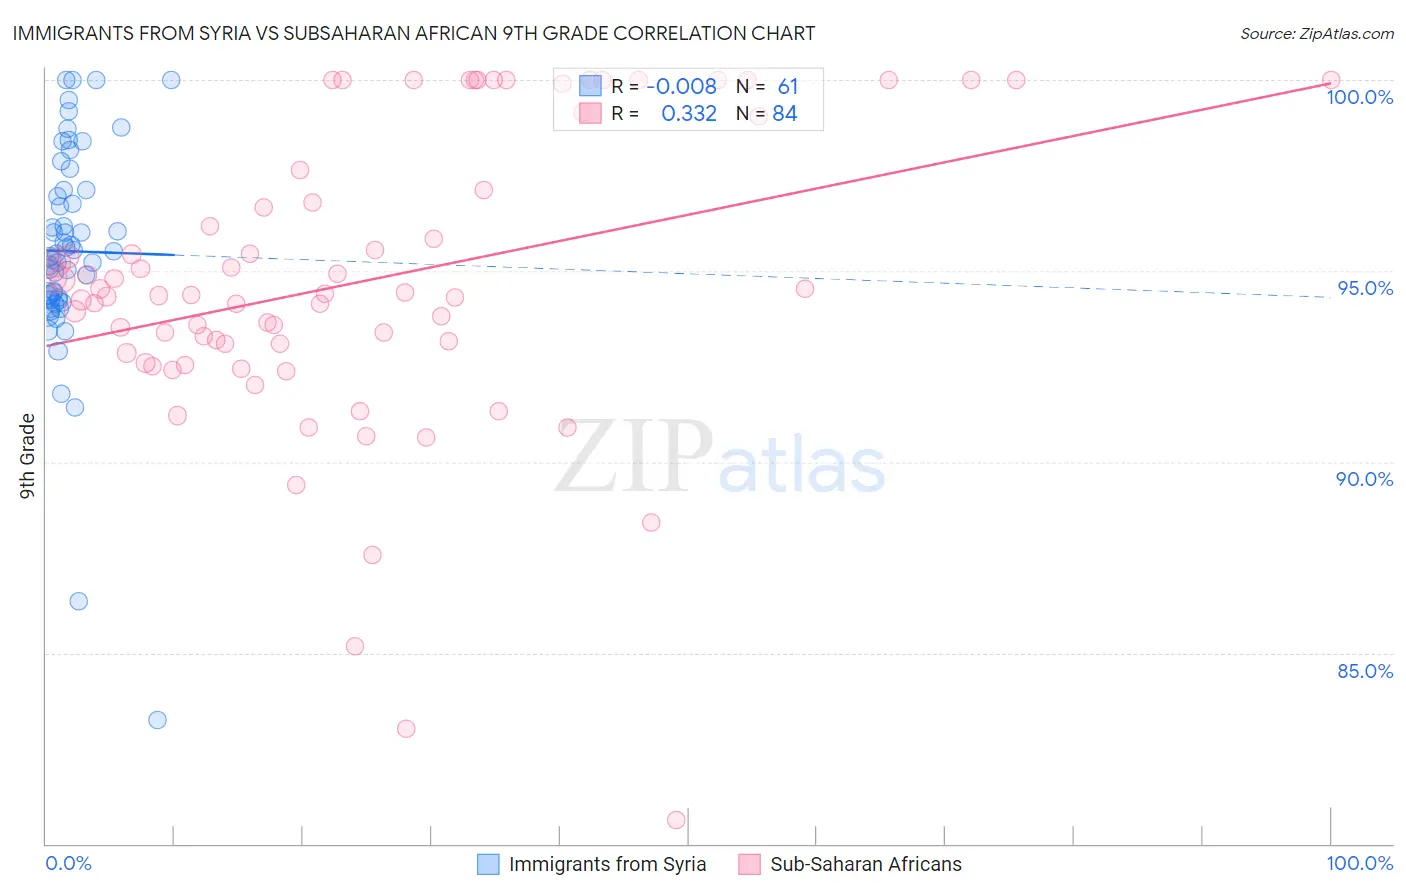 Immigrants from Syria vs Subsaharan African 9th Grade